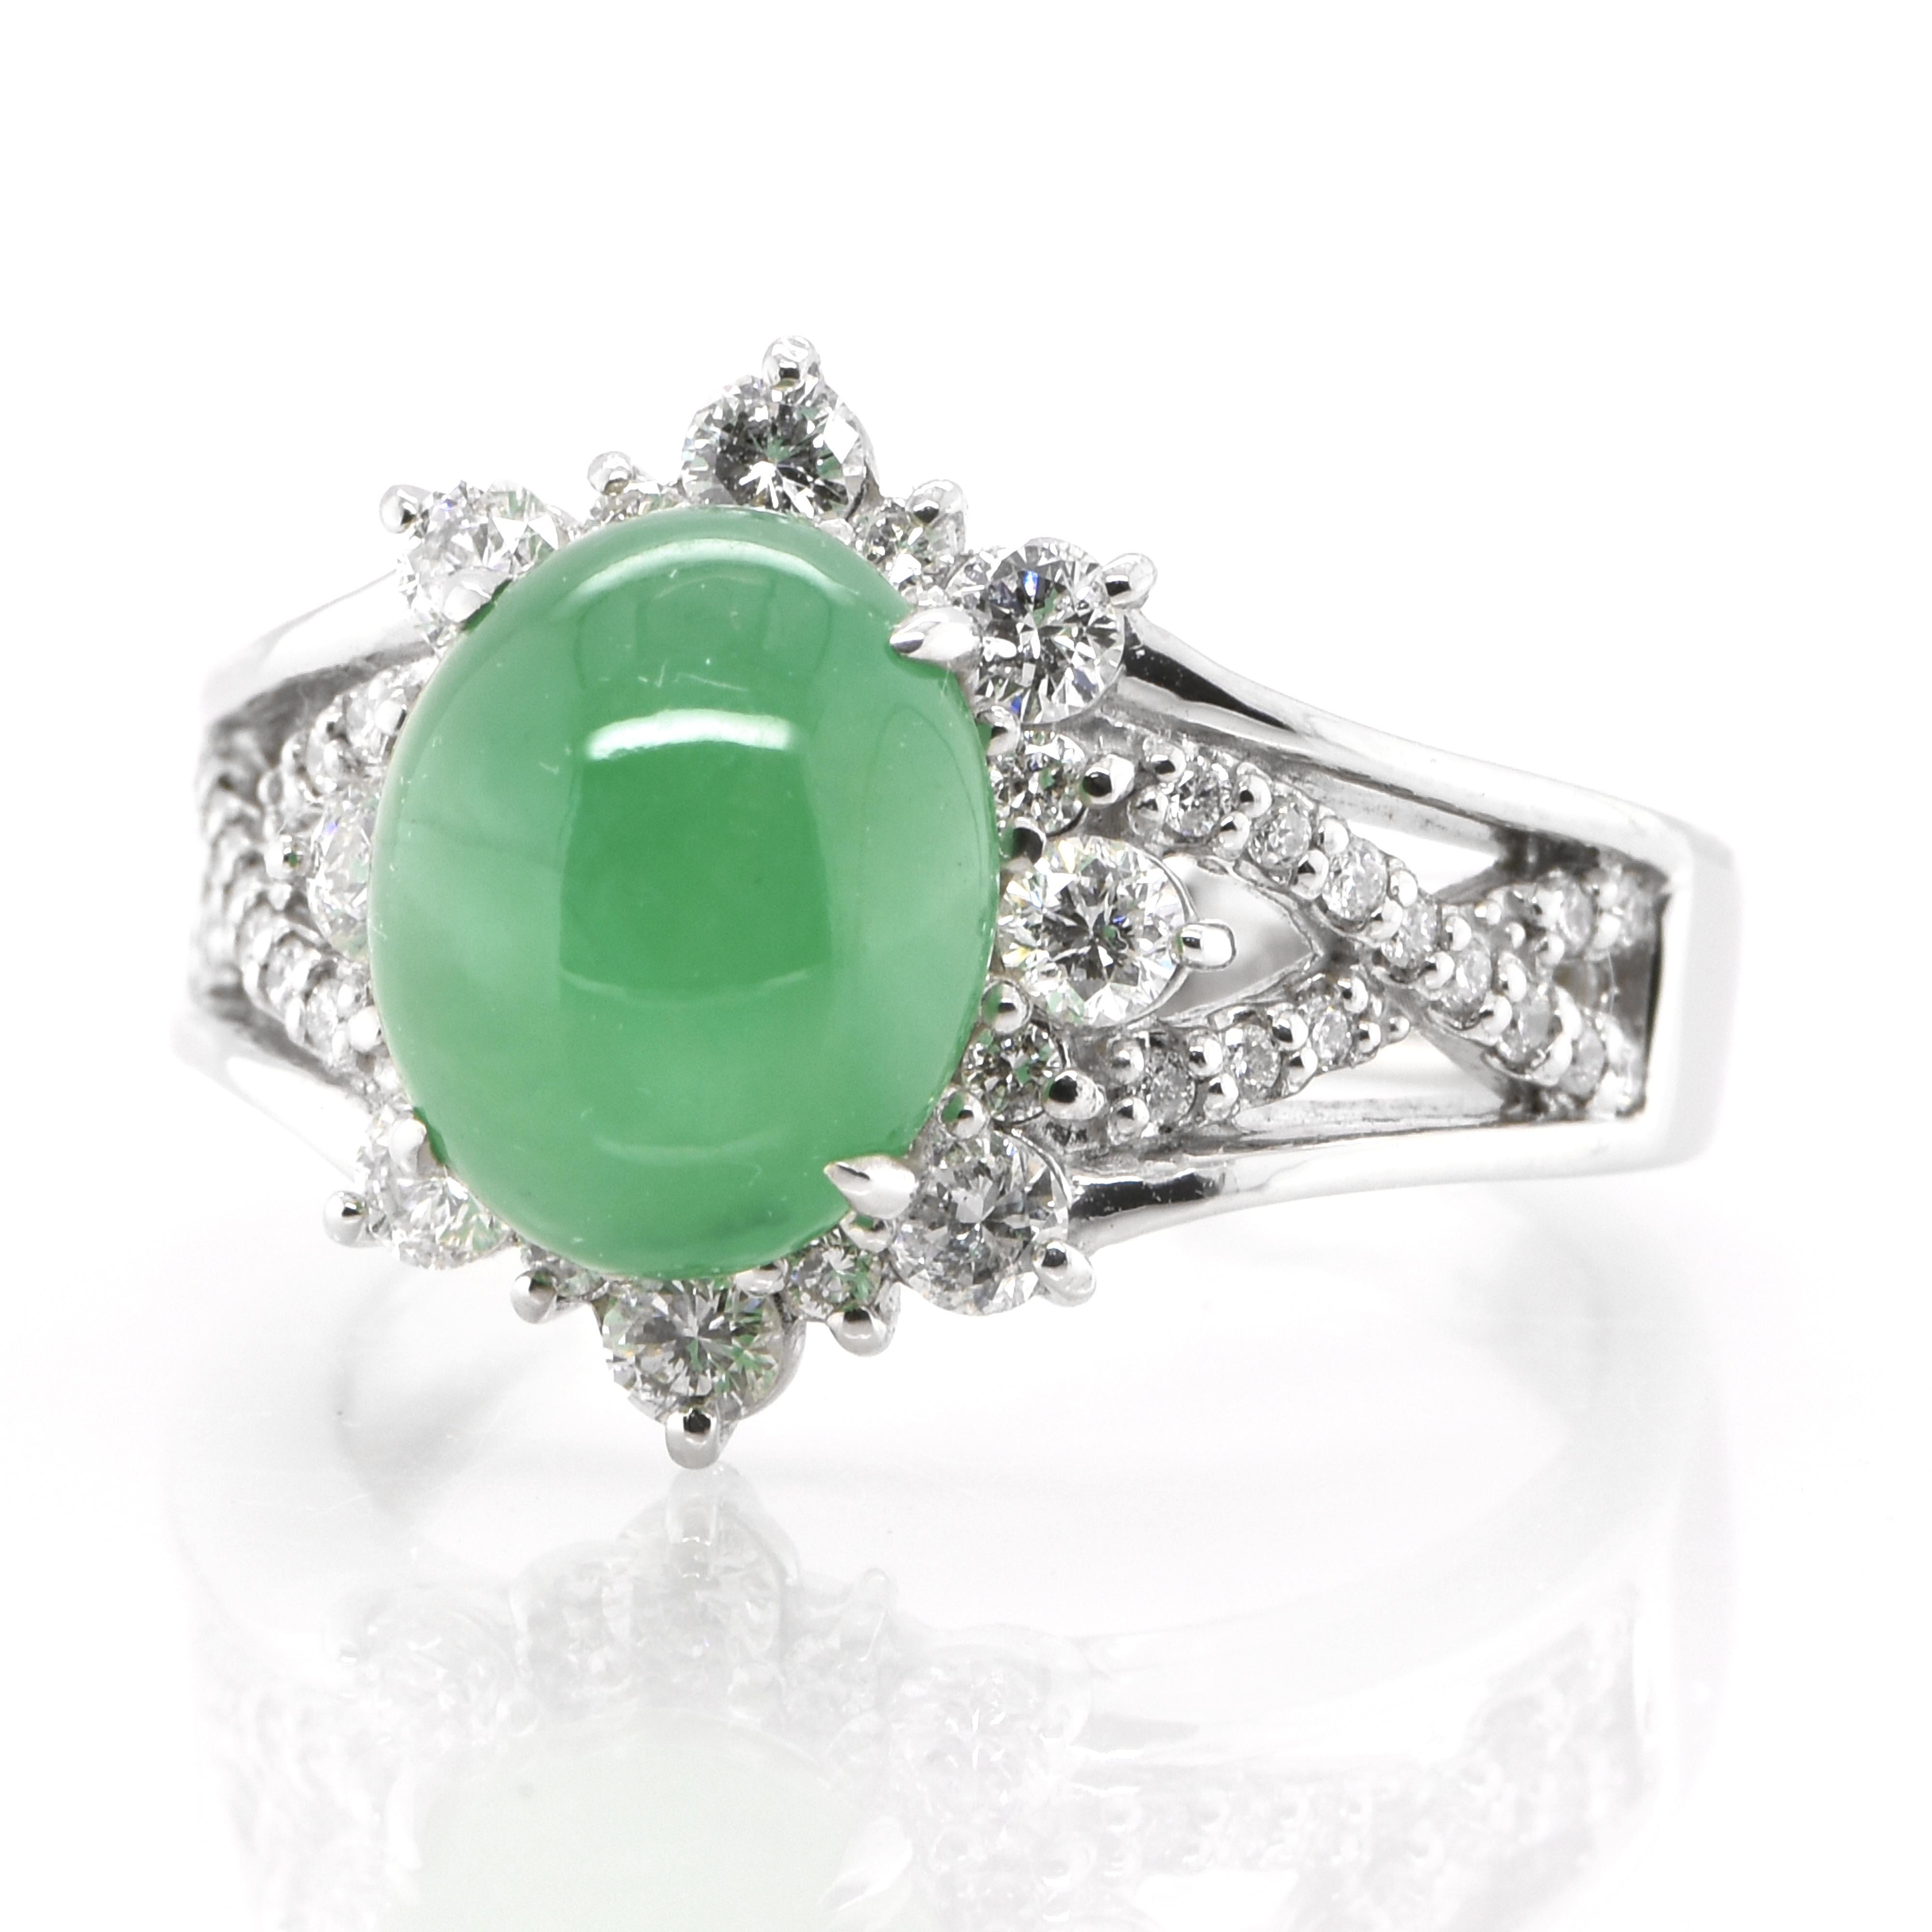 A beautiful Cocktail Ring featuring a 4.10 Carat Natural Apple Green Jadeite and 0.58 Carats of Diamond Accents set in Platinum. Jade has been cherished for millennia. Its nature is pure and enduring, yet sensuous and luxurious. Jadeite’s